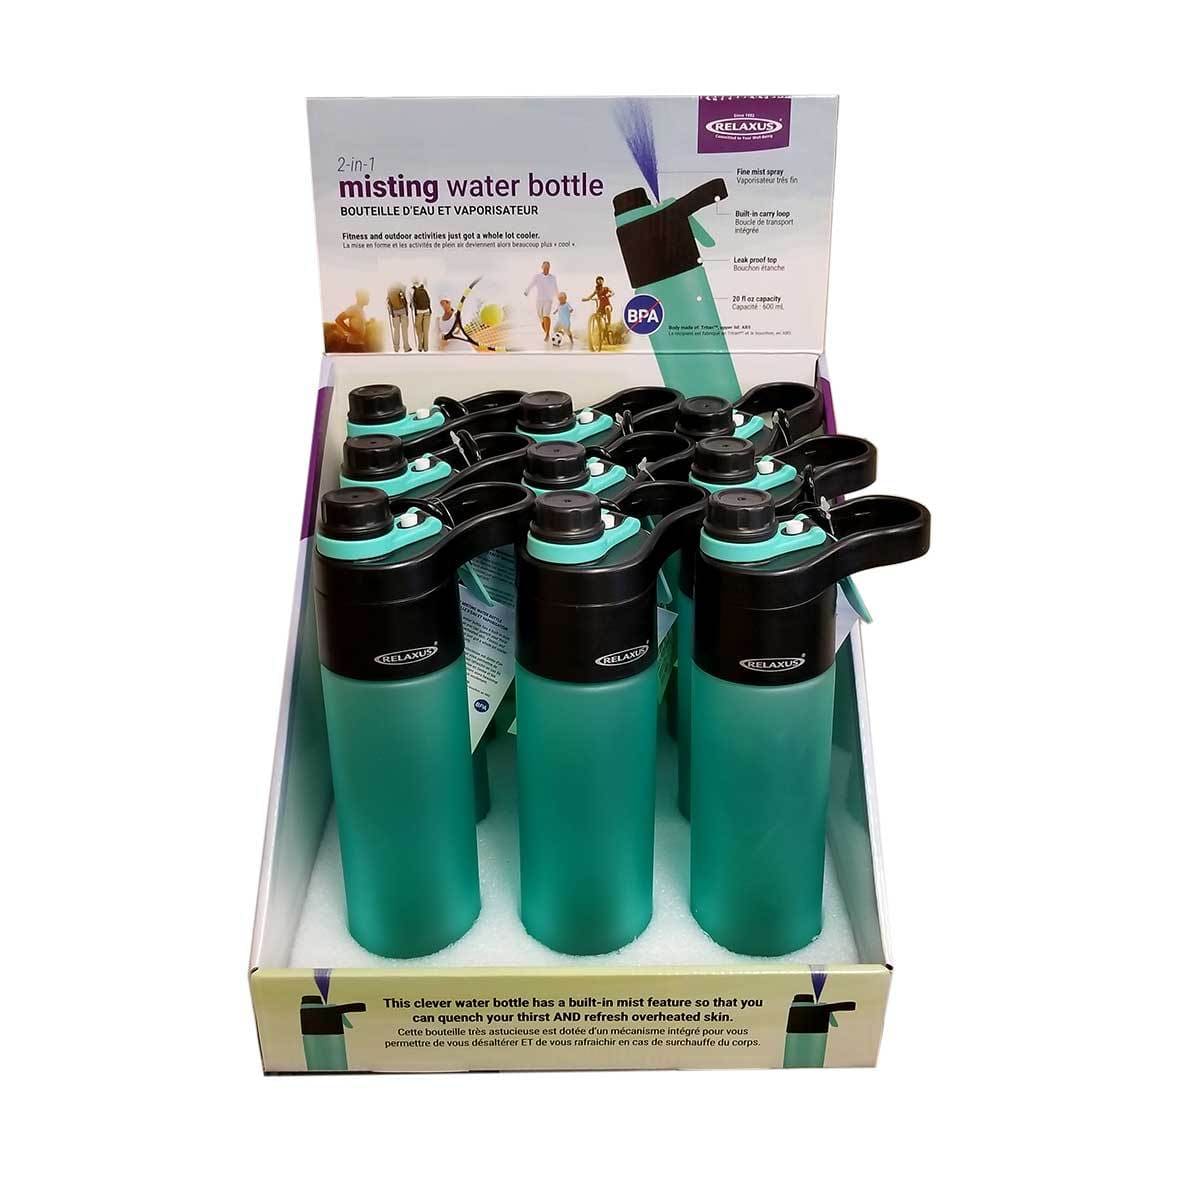 2-In-1 Misting Water Bottle Displayer of 9